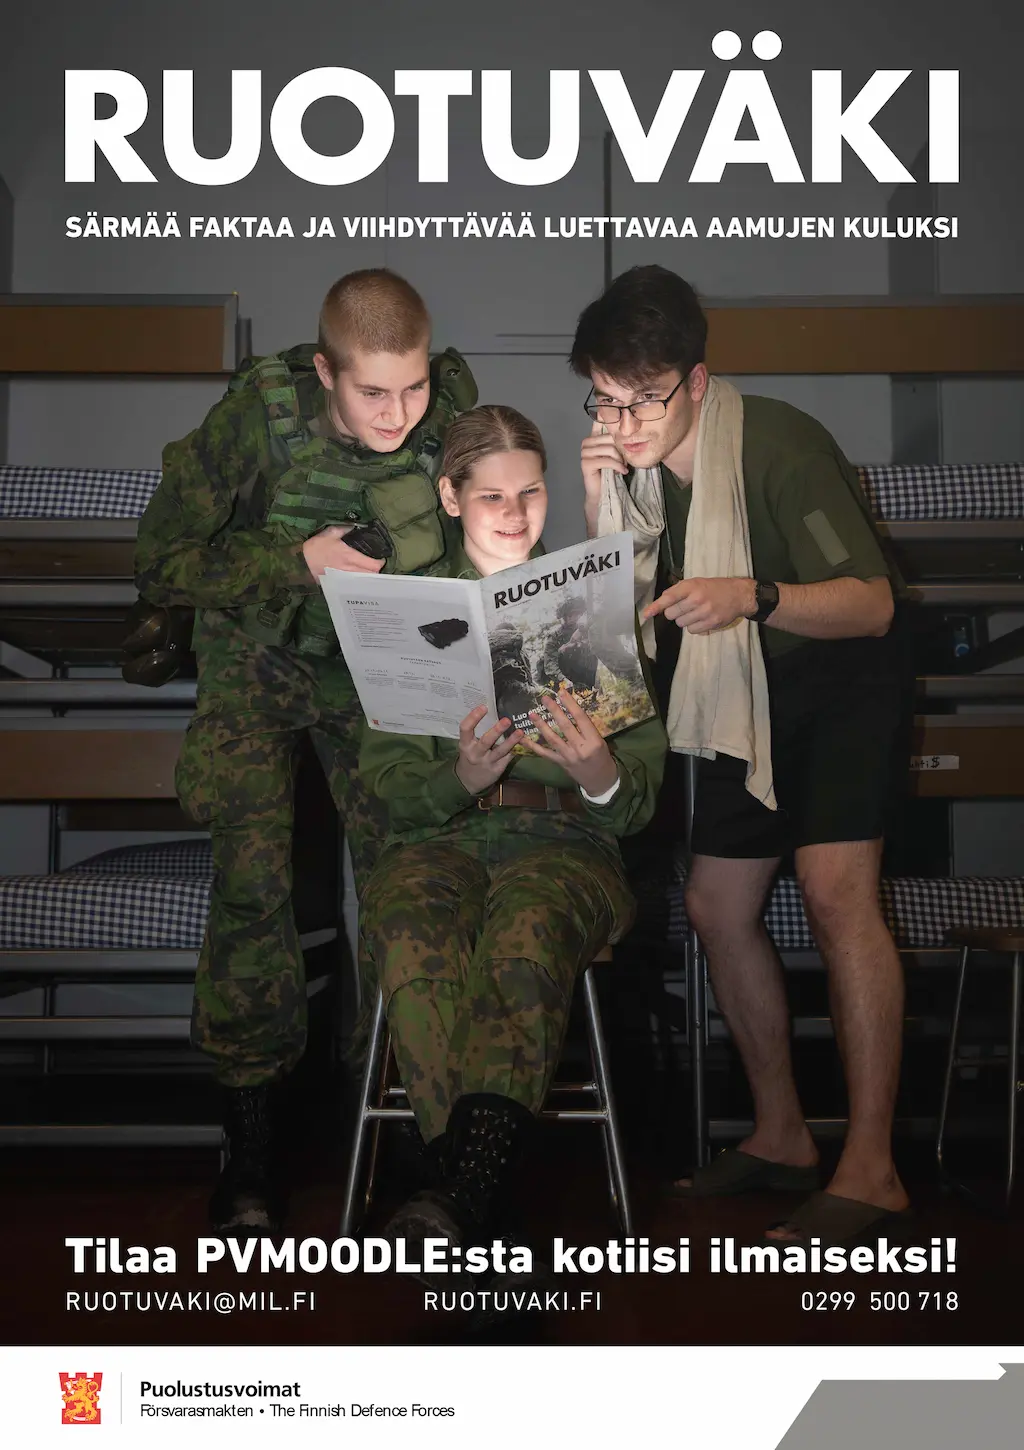 Promotional poster for the Ruotuväki newspaper.